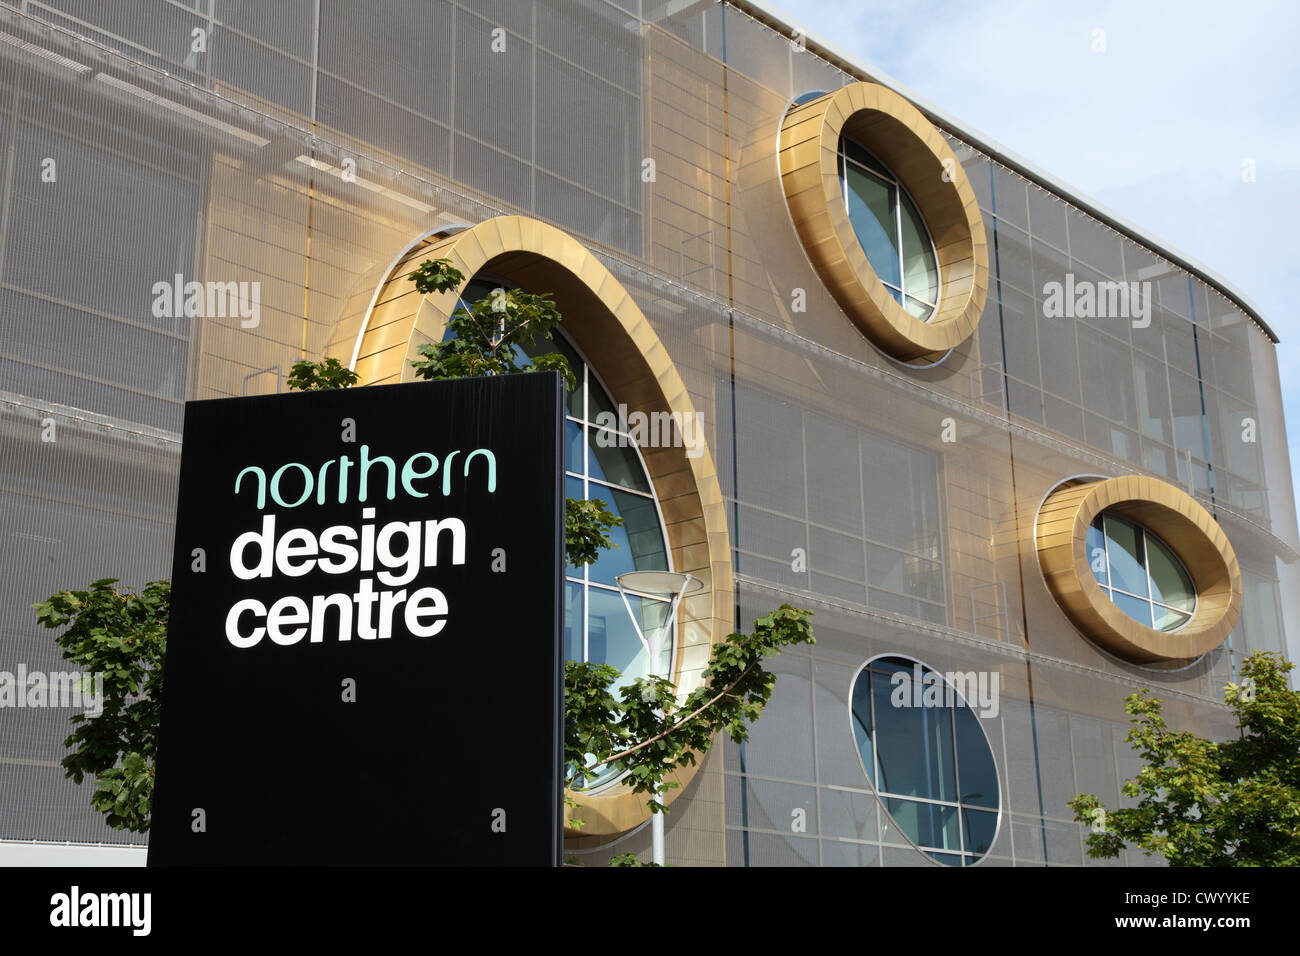 The Nothern Design Centre Gateshead, north east England UK Stock Photo